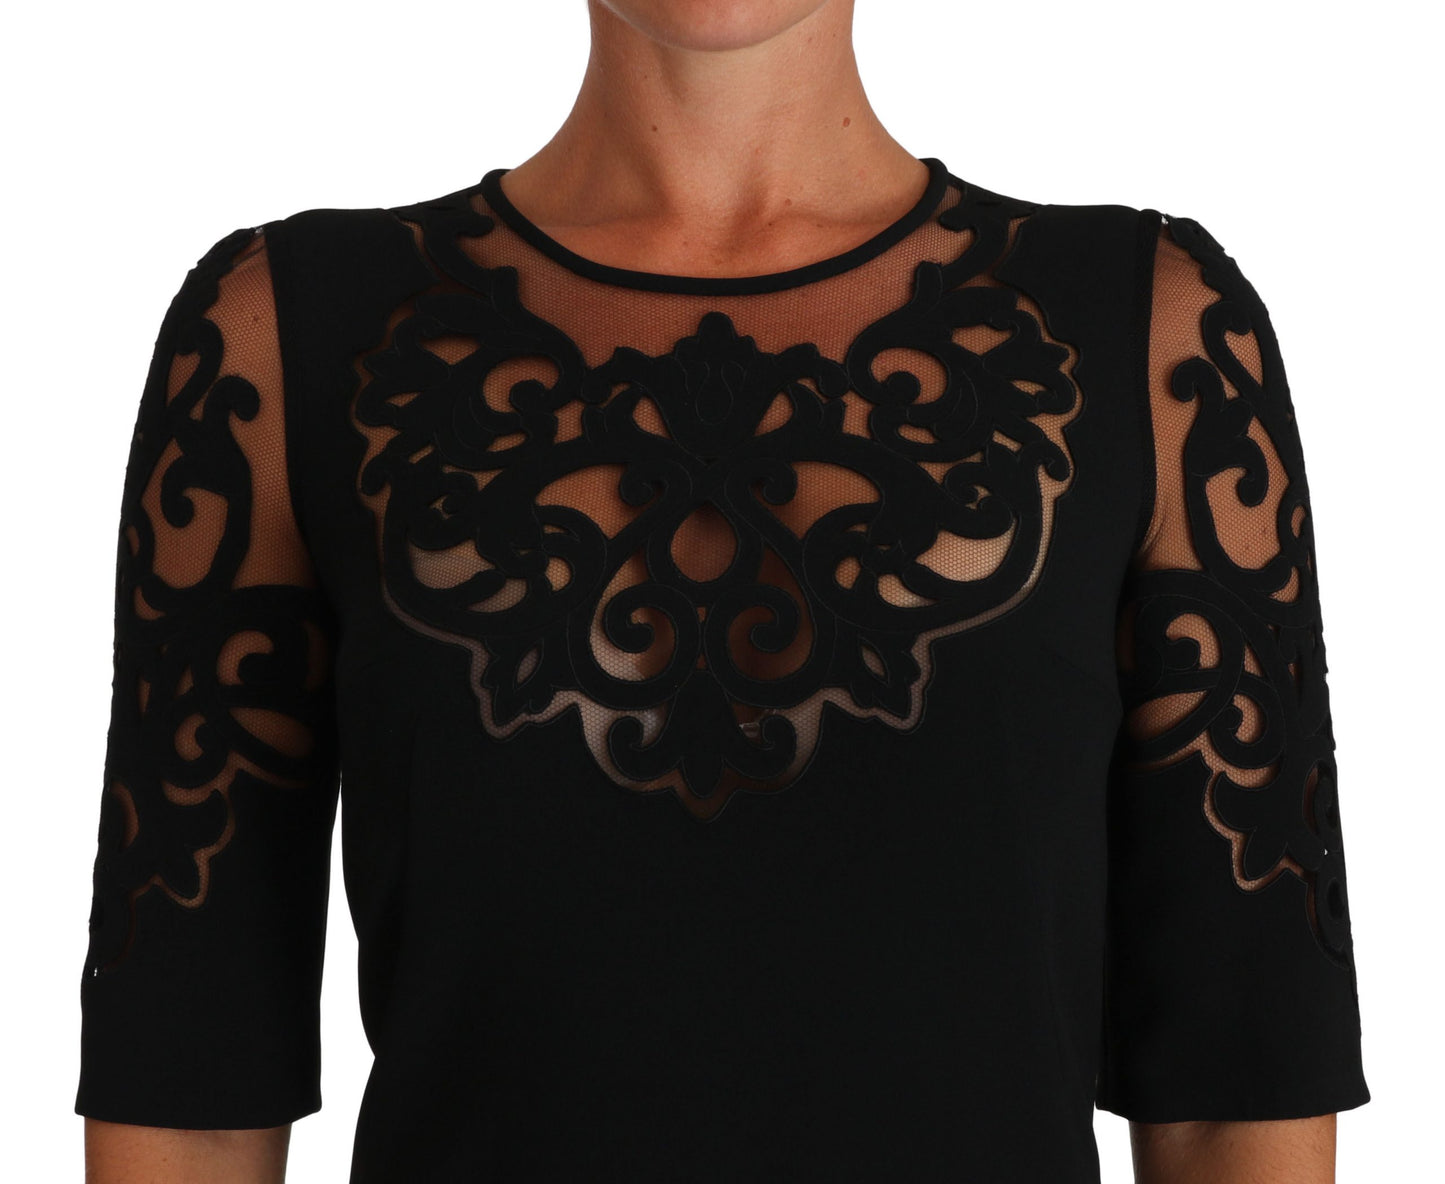 Black Floral Cut Out Pattern Coctail Dress - Designed by Dolce & Gabbana Available to Buy at a Discounted Price on Moon Behind The Hill Online Designer Discount Store